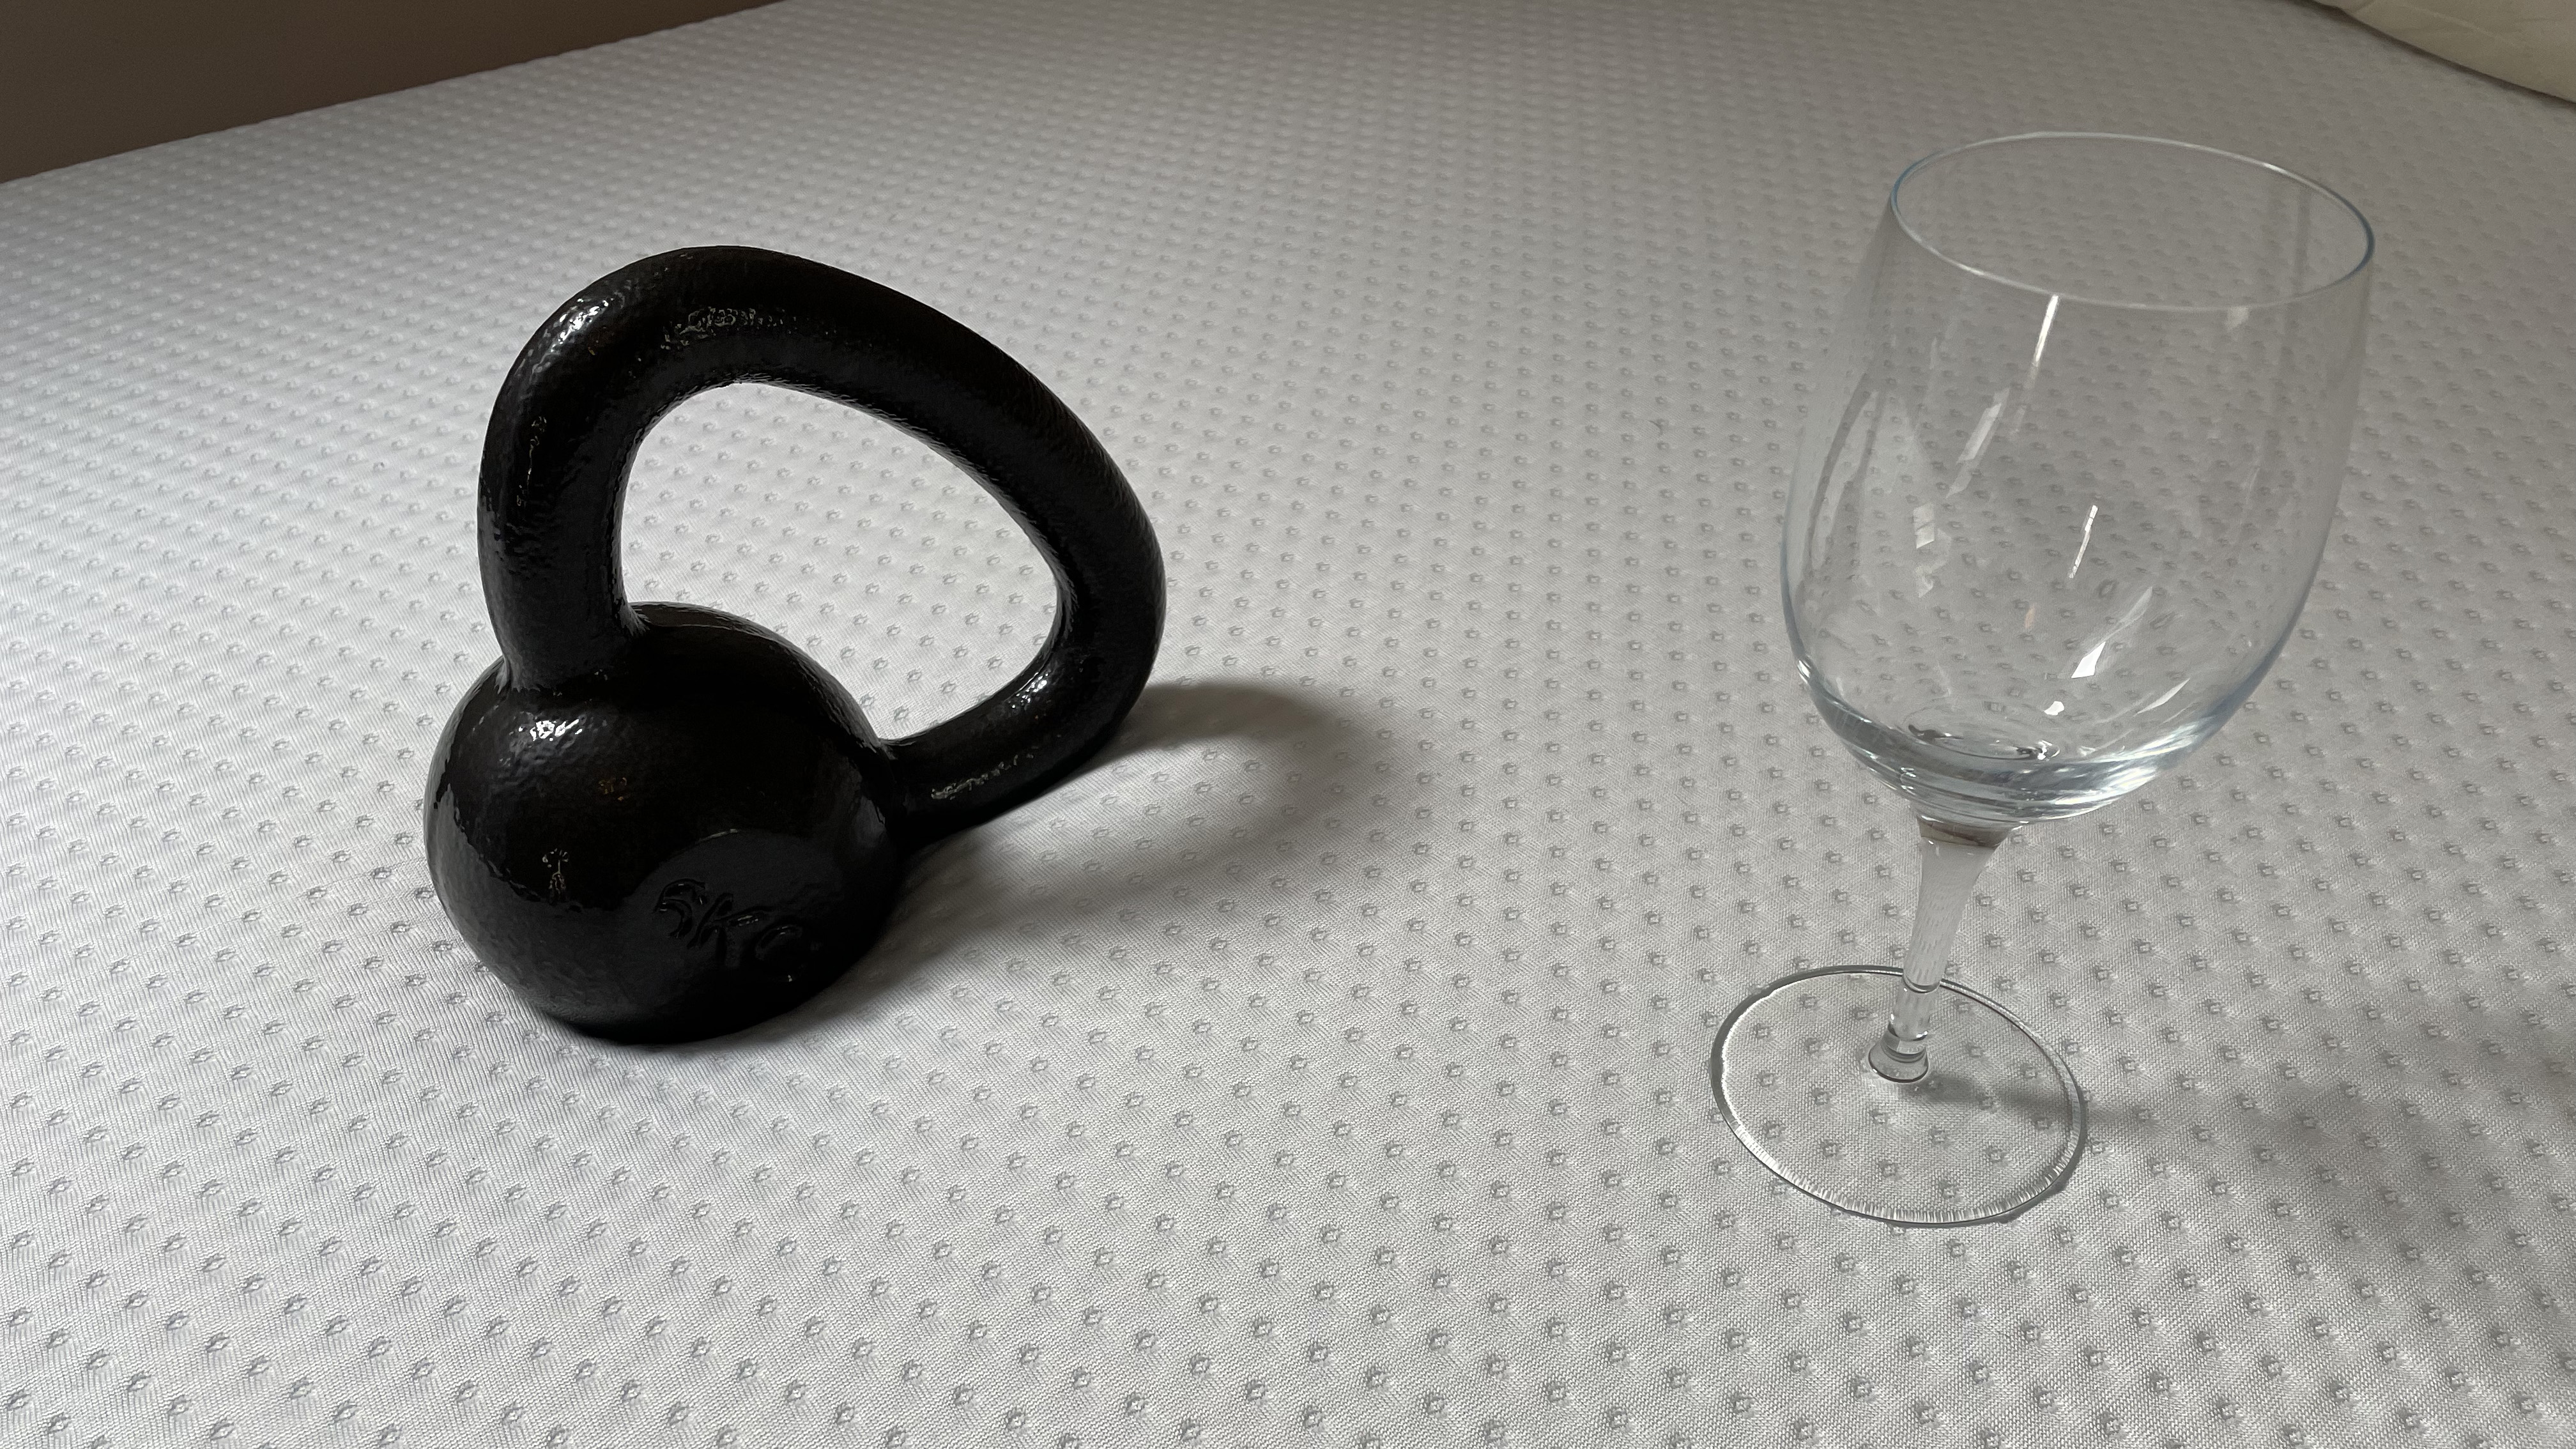 Image shows a 6KG weight dropped next to a wine glass placed on the Emma Mattress during a motion isolation test